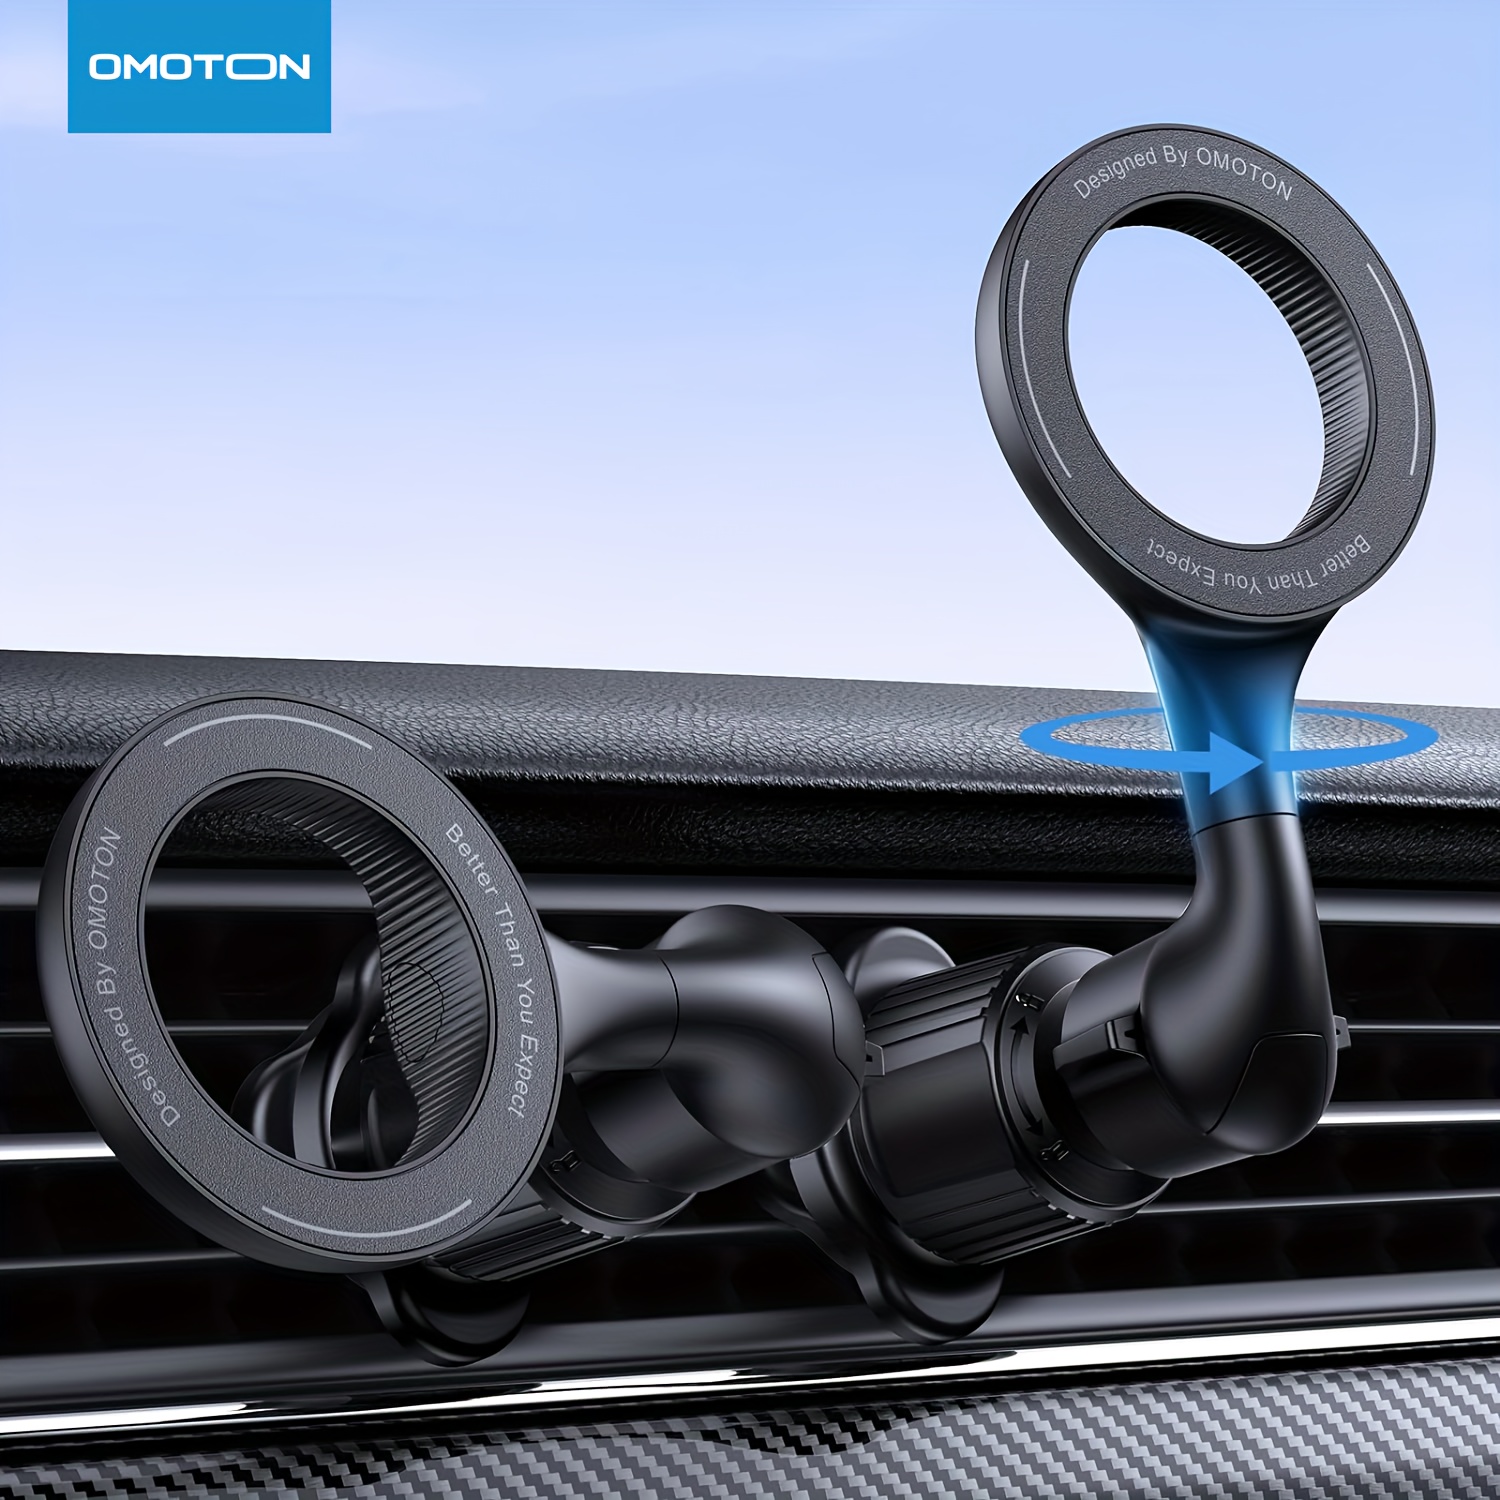 

Omoton , [easily Install] Magnetic Phone Holder For Car With Folding Hook Clip And 360°rotation Extended Arm, [20xn52 Magnets] Hands Free Car Vent Phone Mount Fit For All Phones